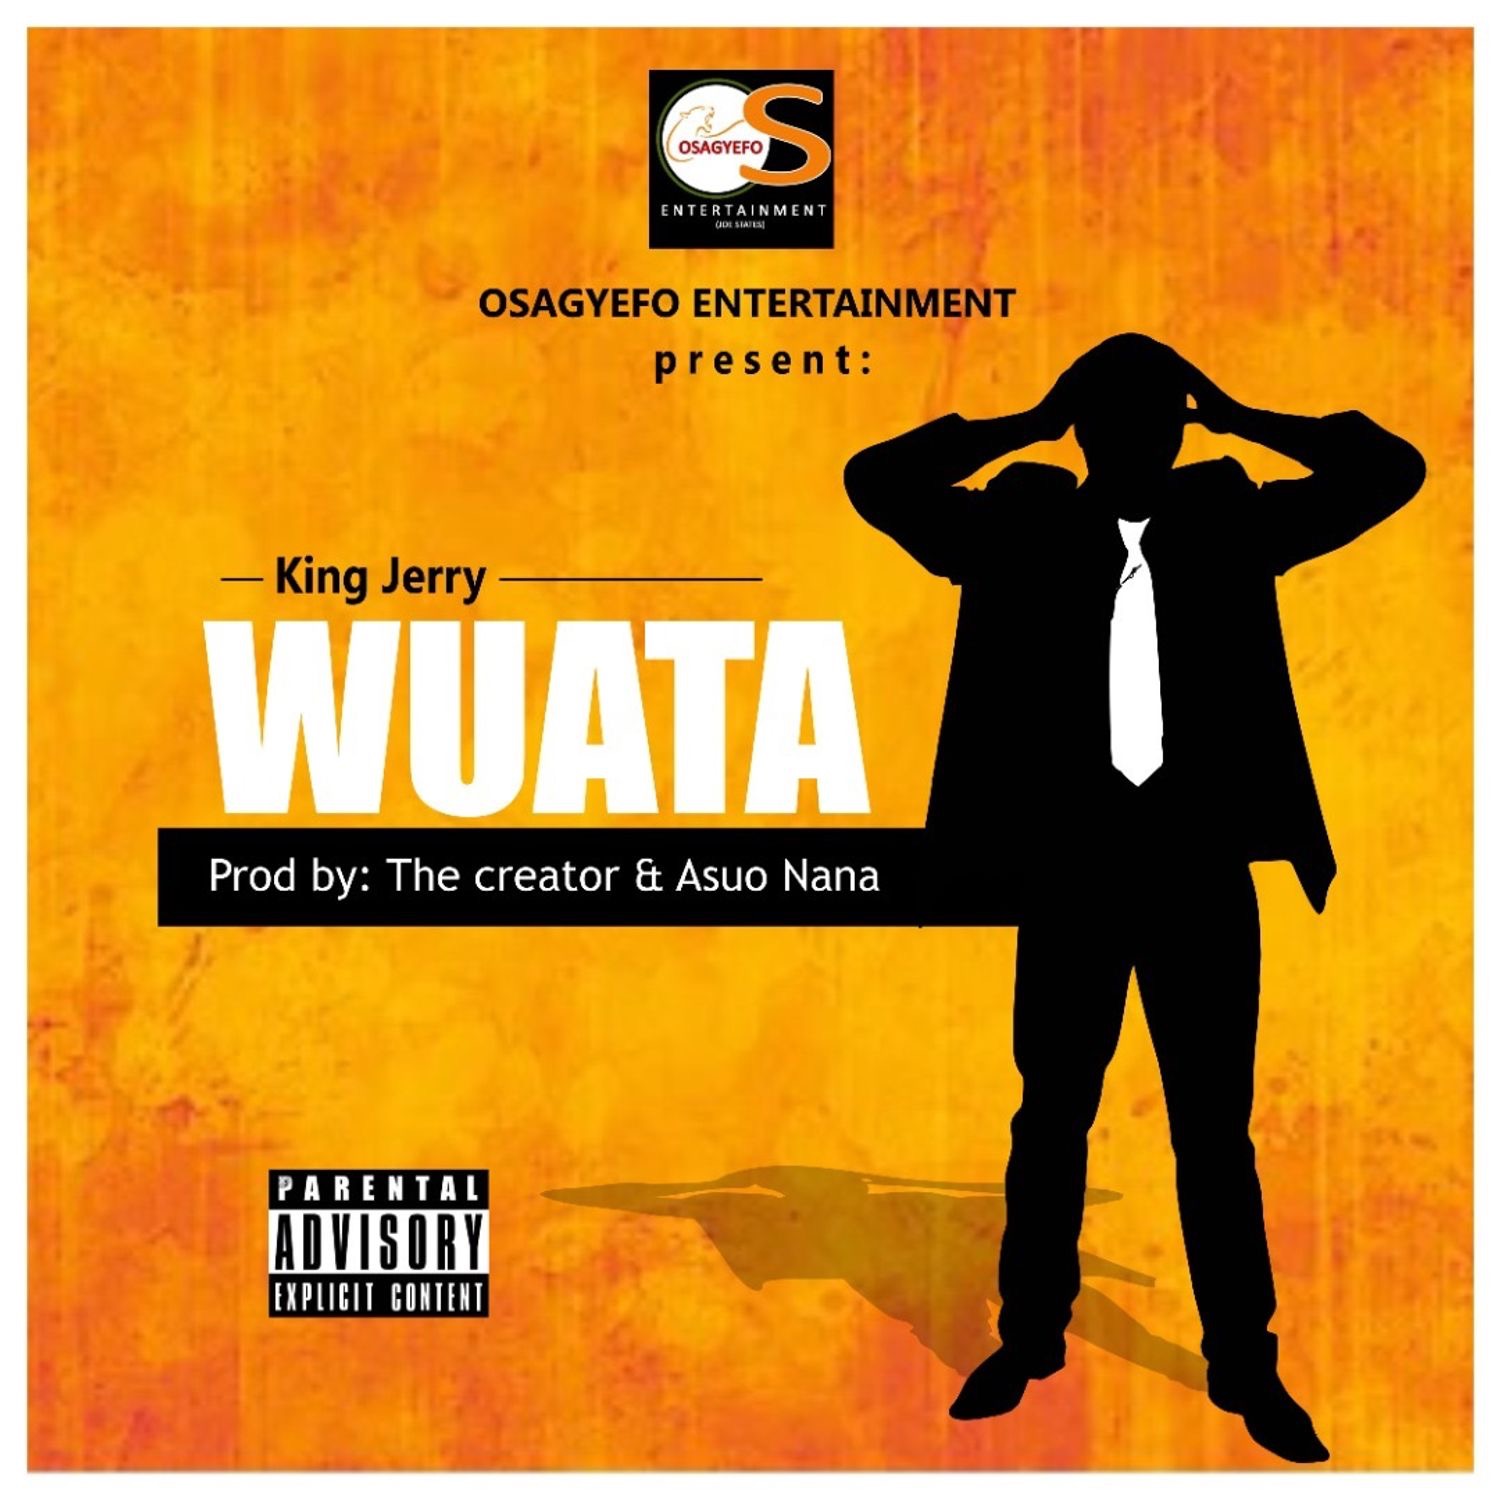 King Jerry Wuata Tmmotiongh.com